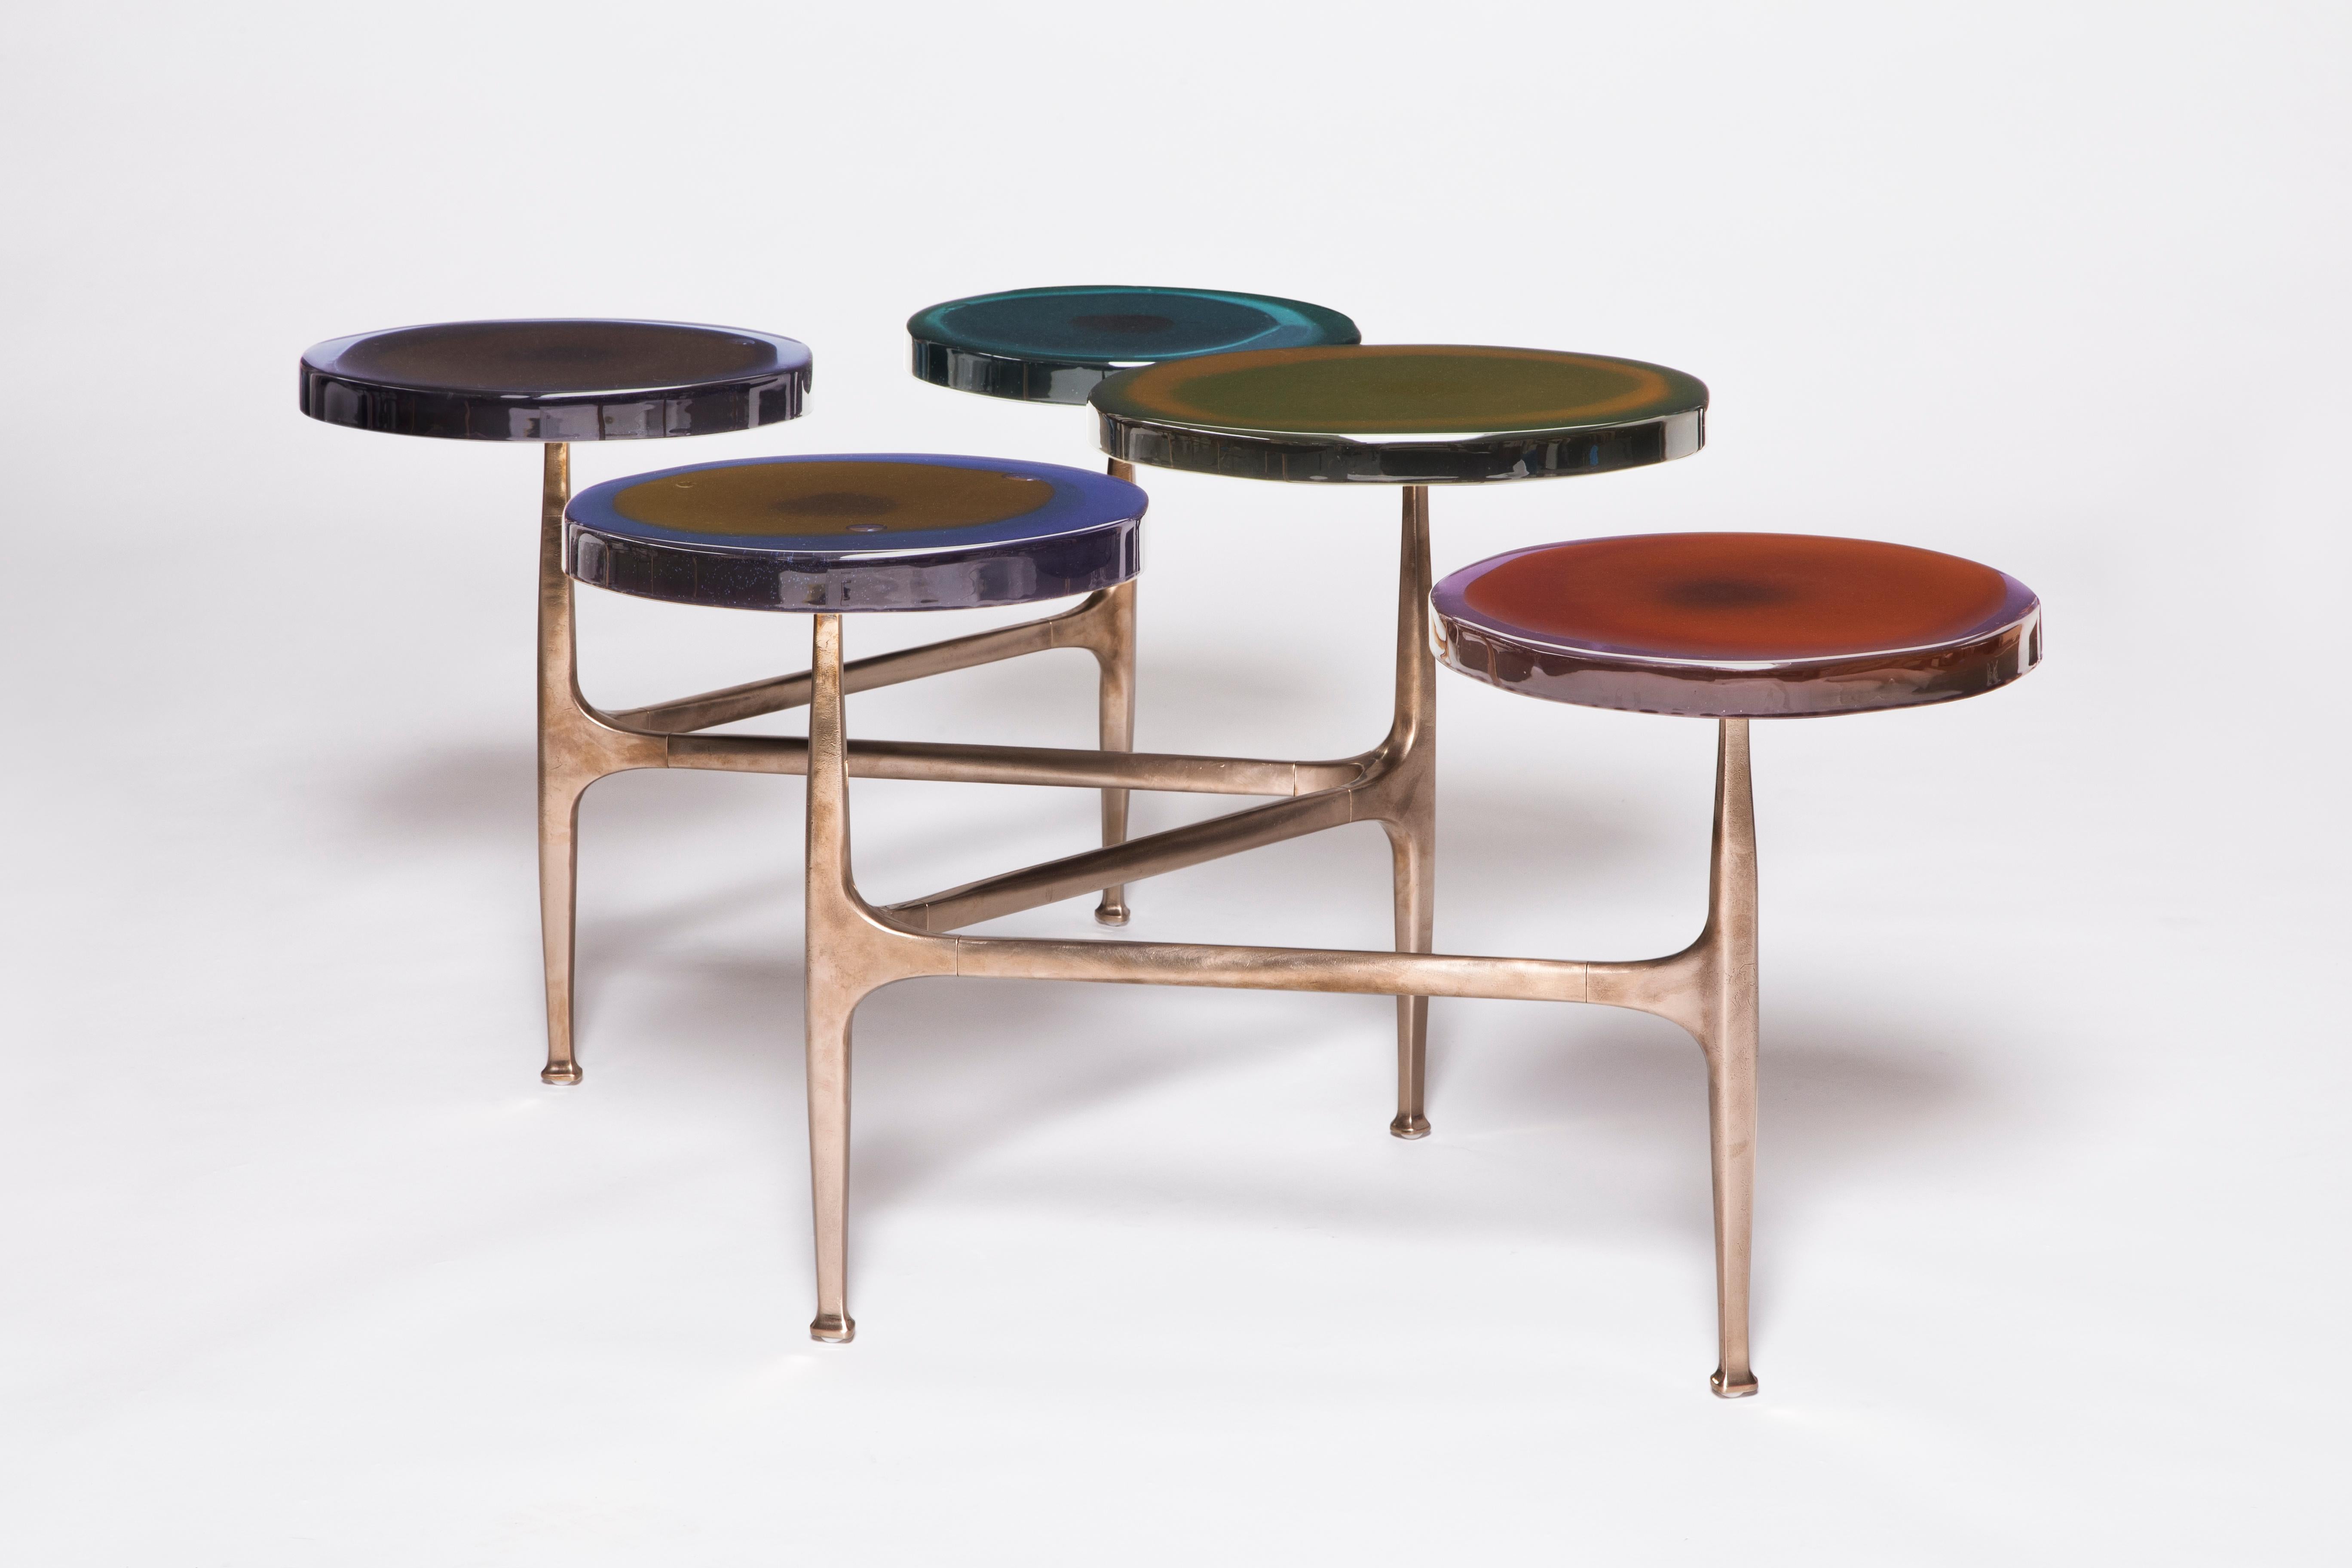 Agatha coffee table by Draga & Aurel
Dimensions: W 121 x D 80 x H 50 cm
 top Ø 32/40 cm
Materials: Resin, Bronze

The Agatha coffee tables are featured by irregular circular tops of transparent and
colorful resin sit on a bronze frame with a